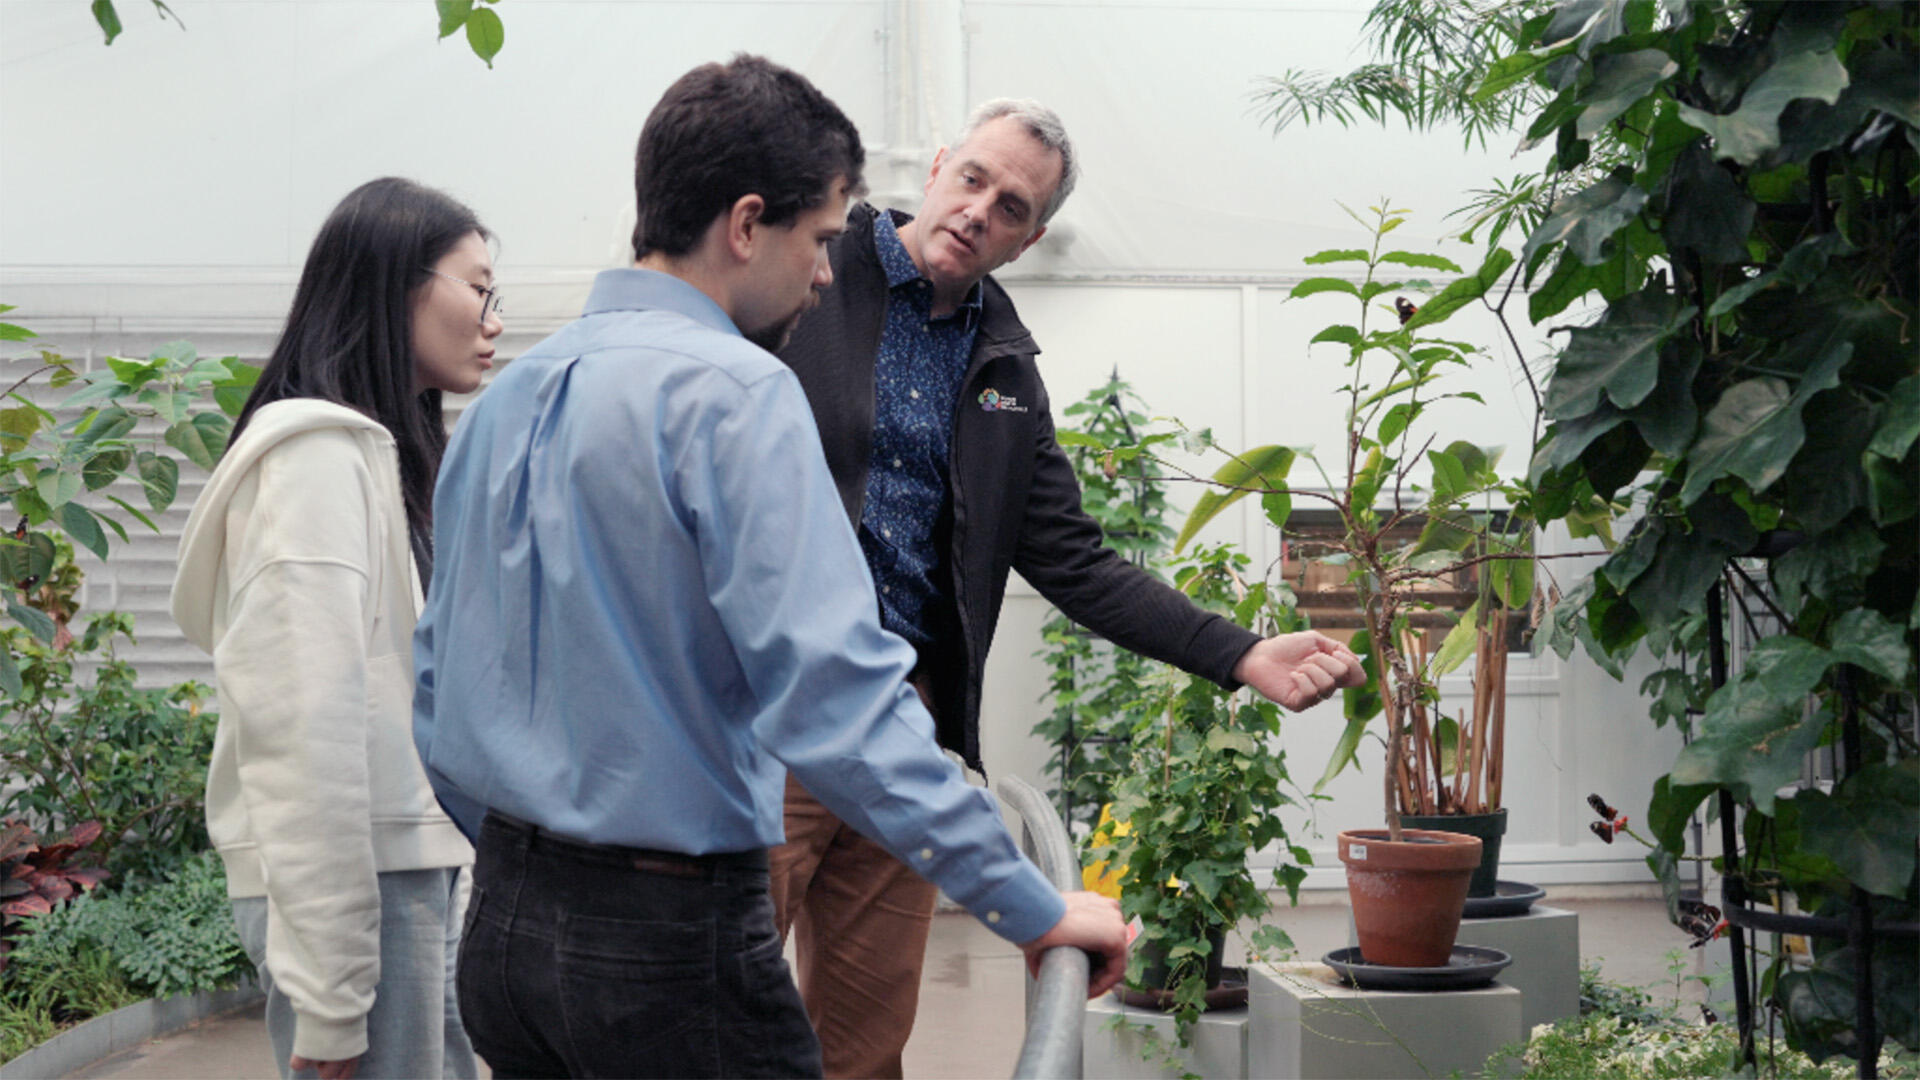 Three people discussing and examining plants.